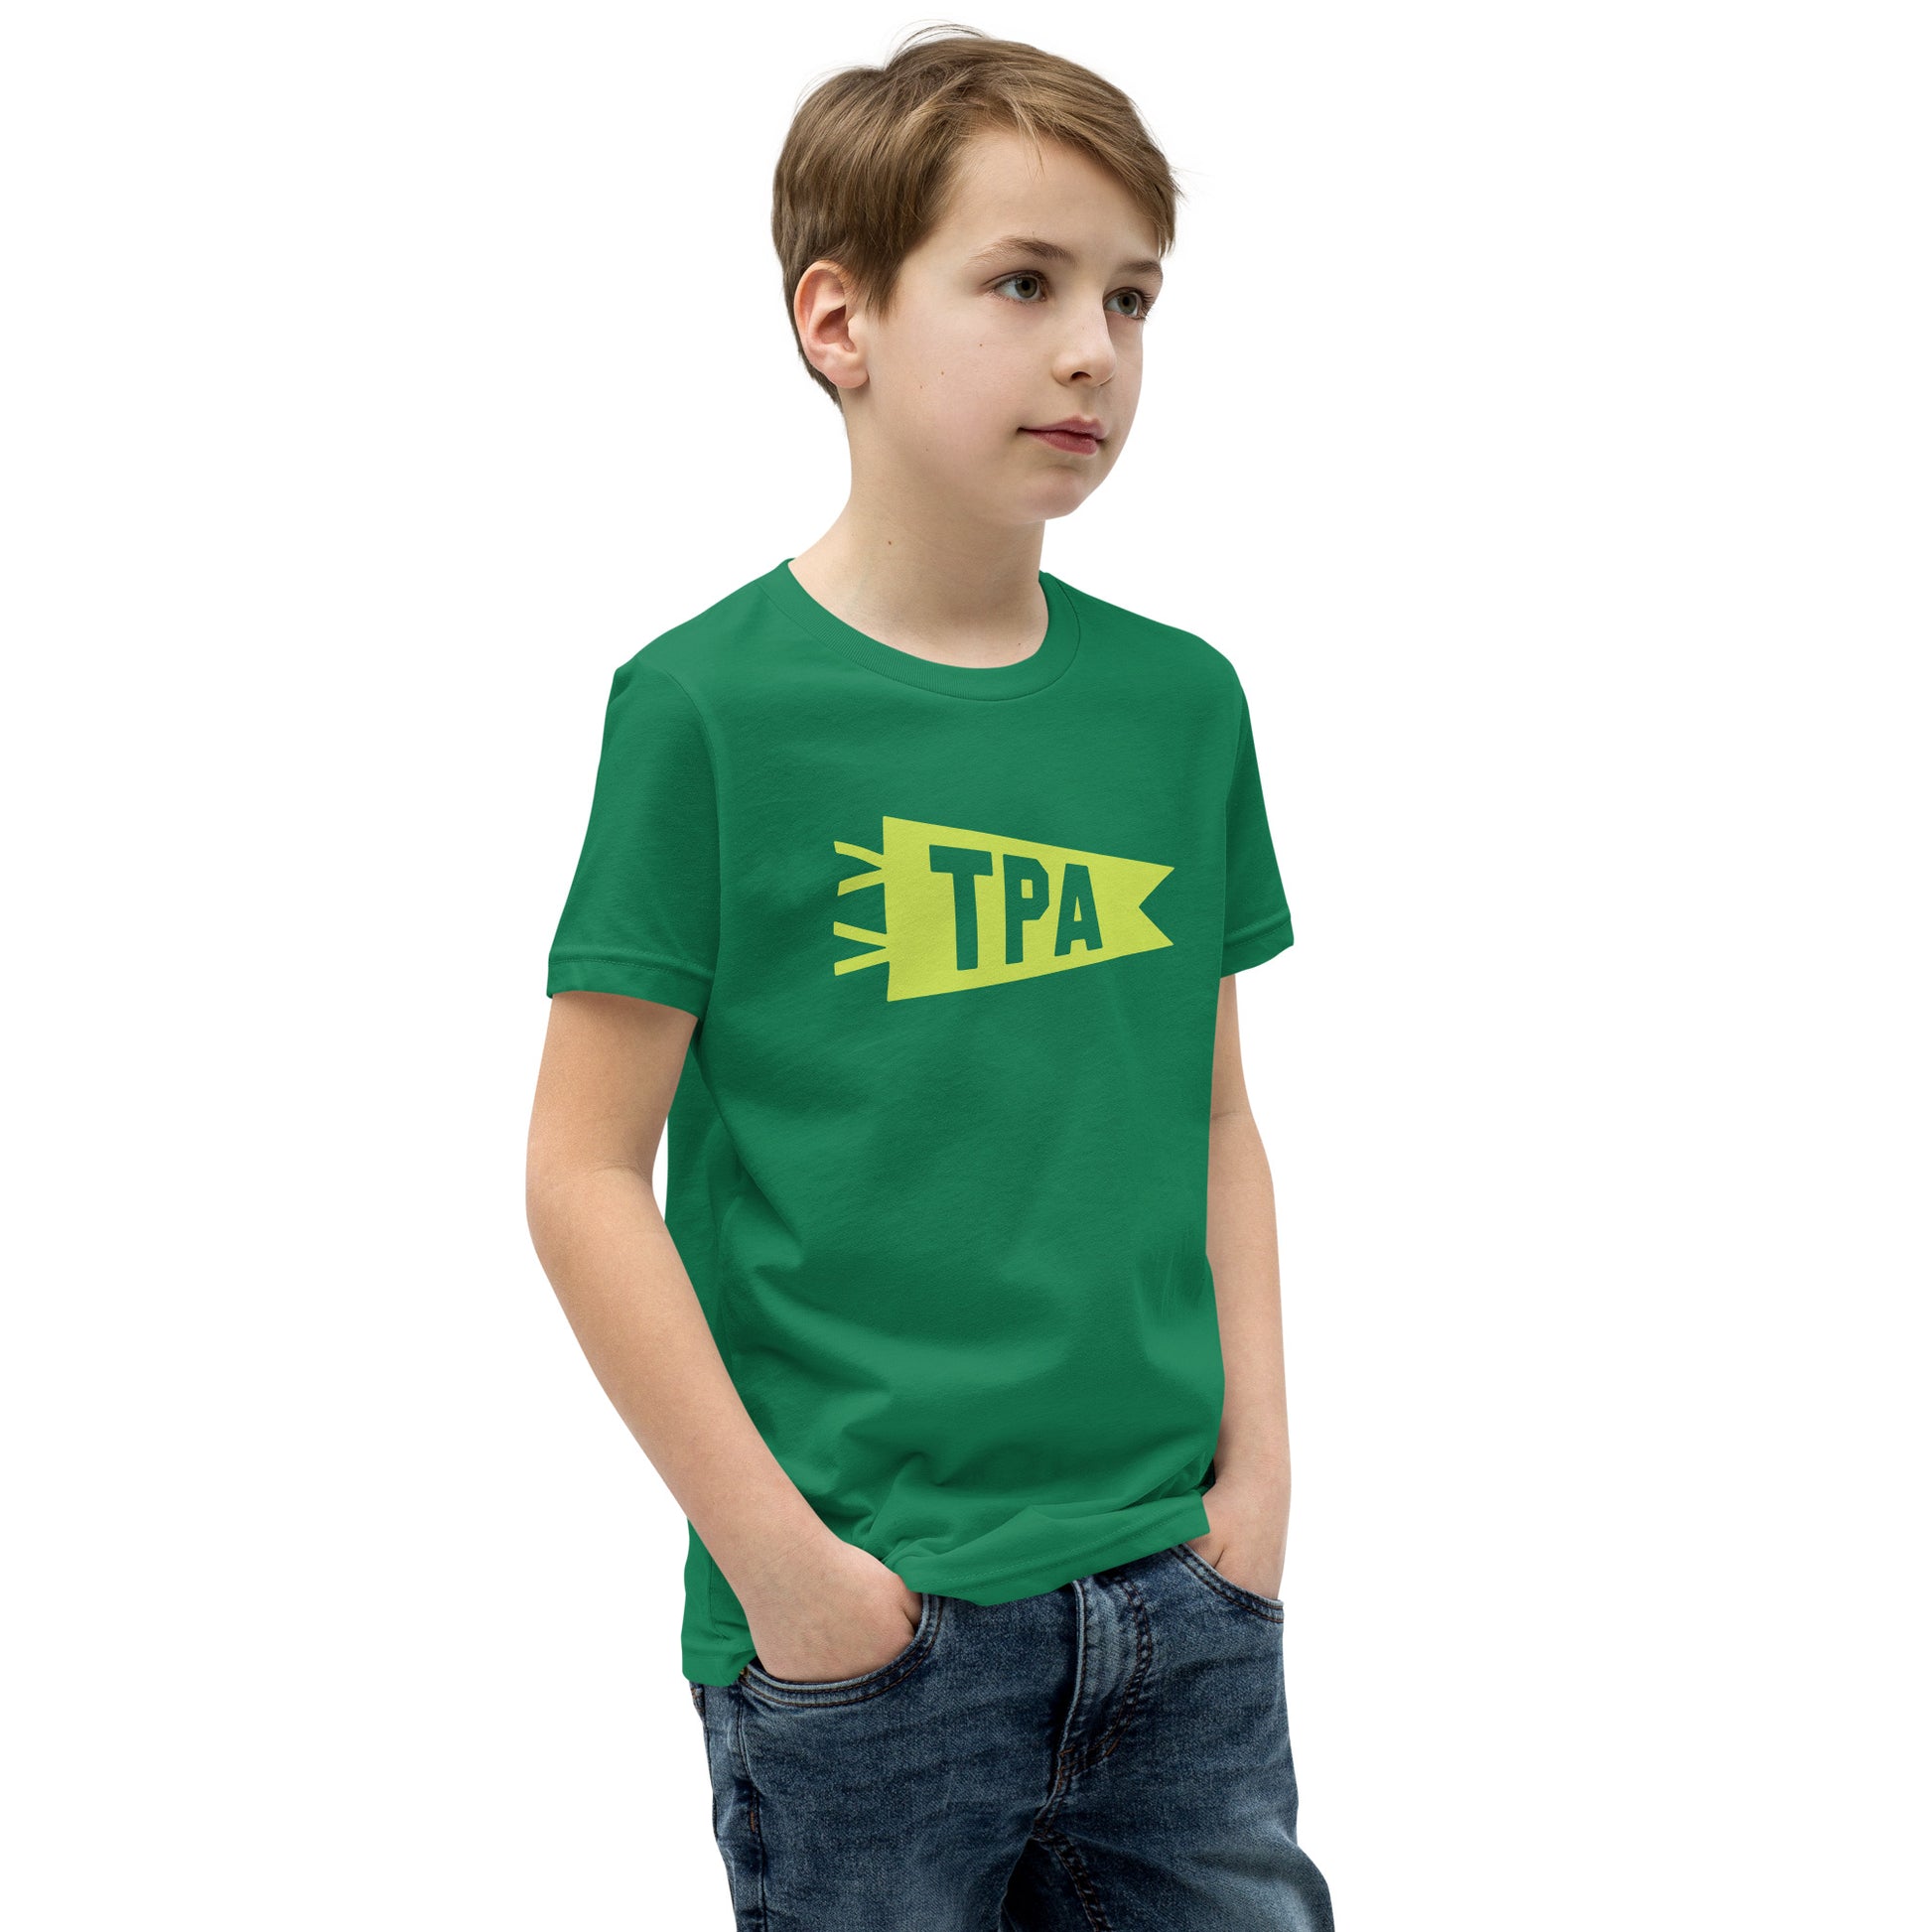 Kid's Airport Code Tee - Green Graphic • TPA Tampa • YHM Designs - Image 07